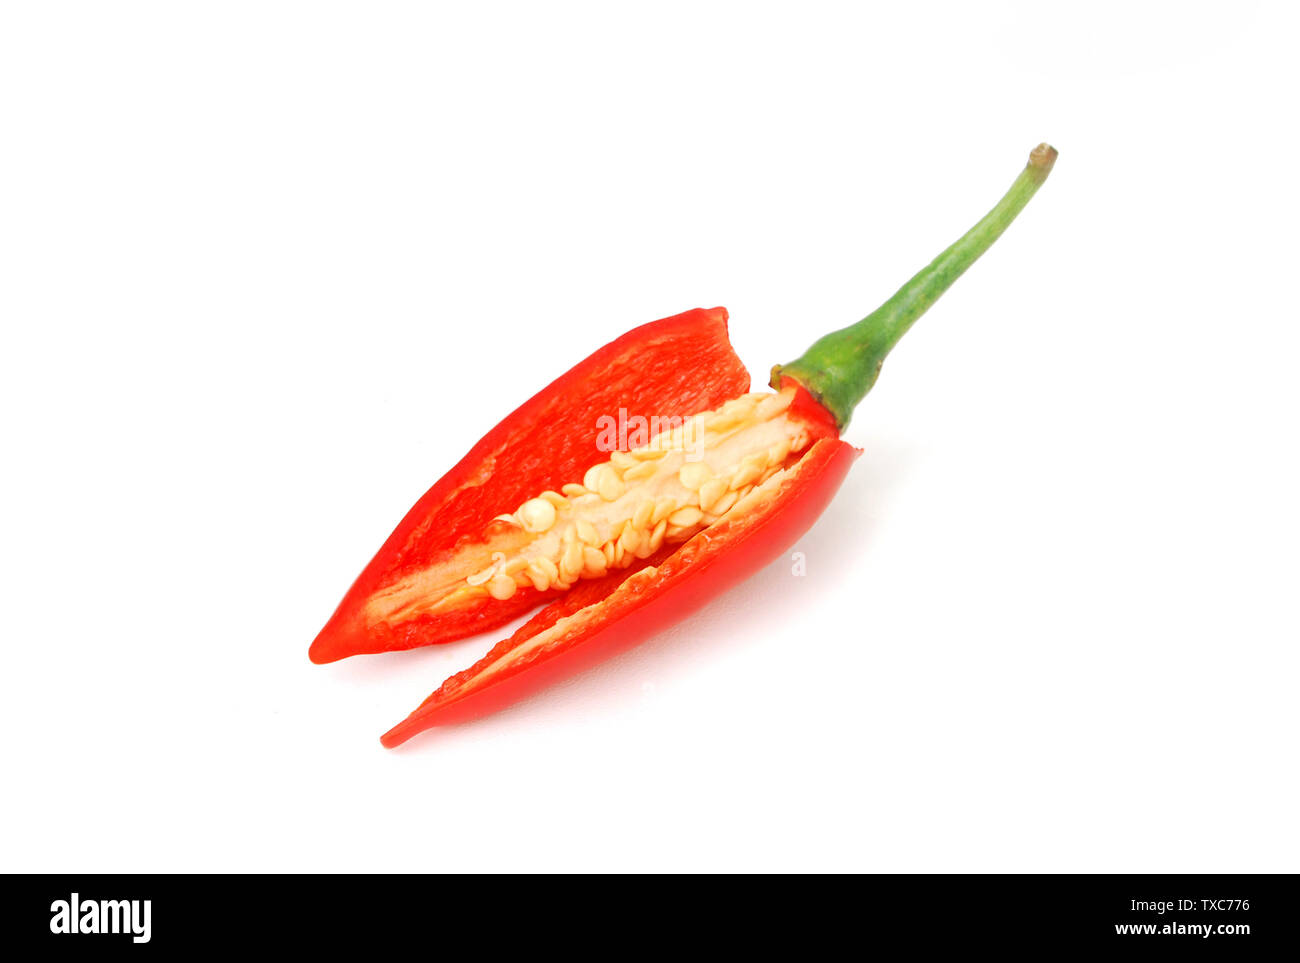 Capsicum frutescens L. Chilli Pepper.Chili has anti-oxidants, helps slow down aging. Stock Photo